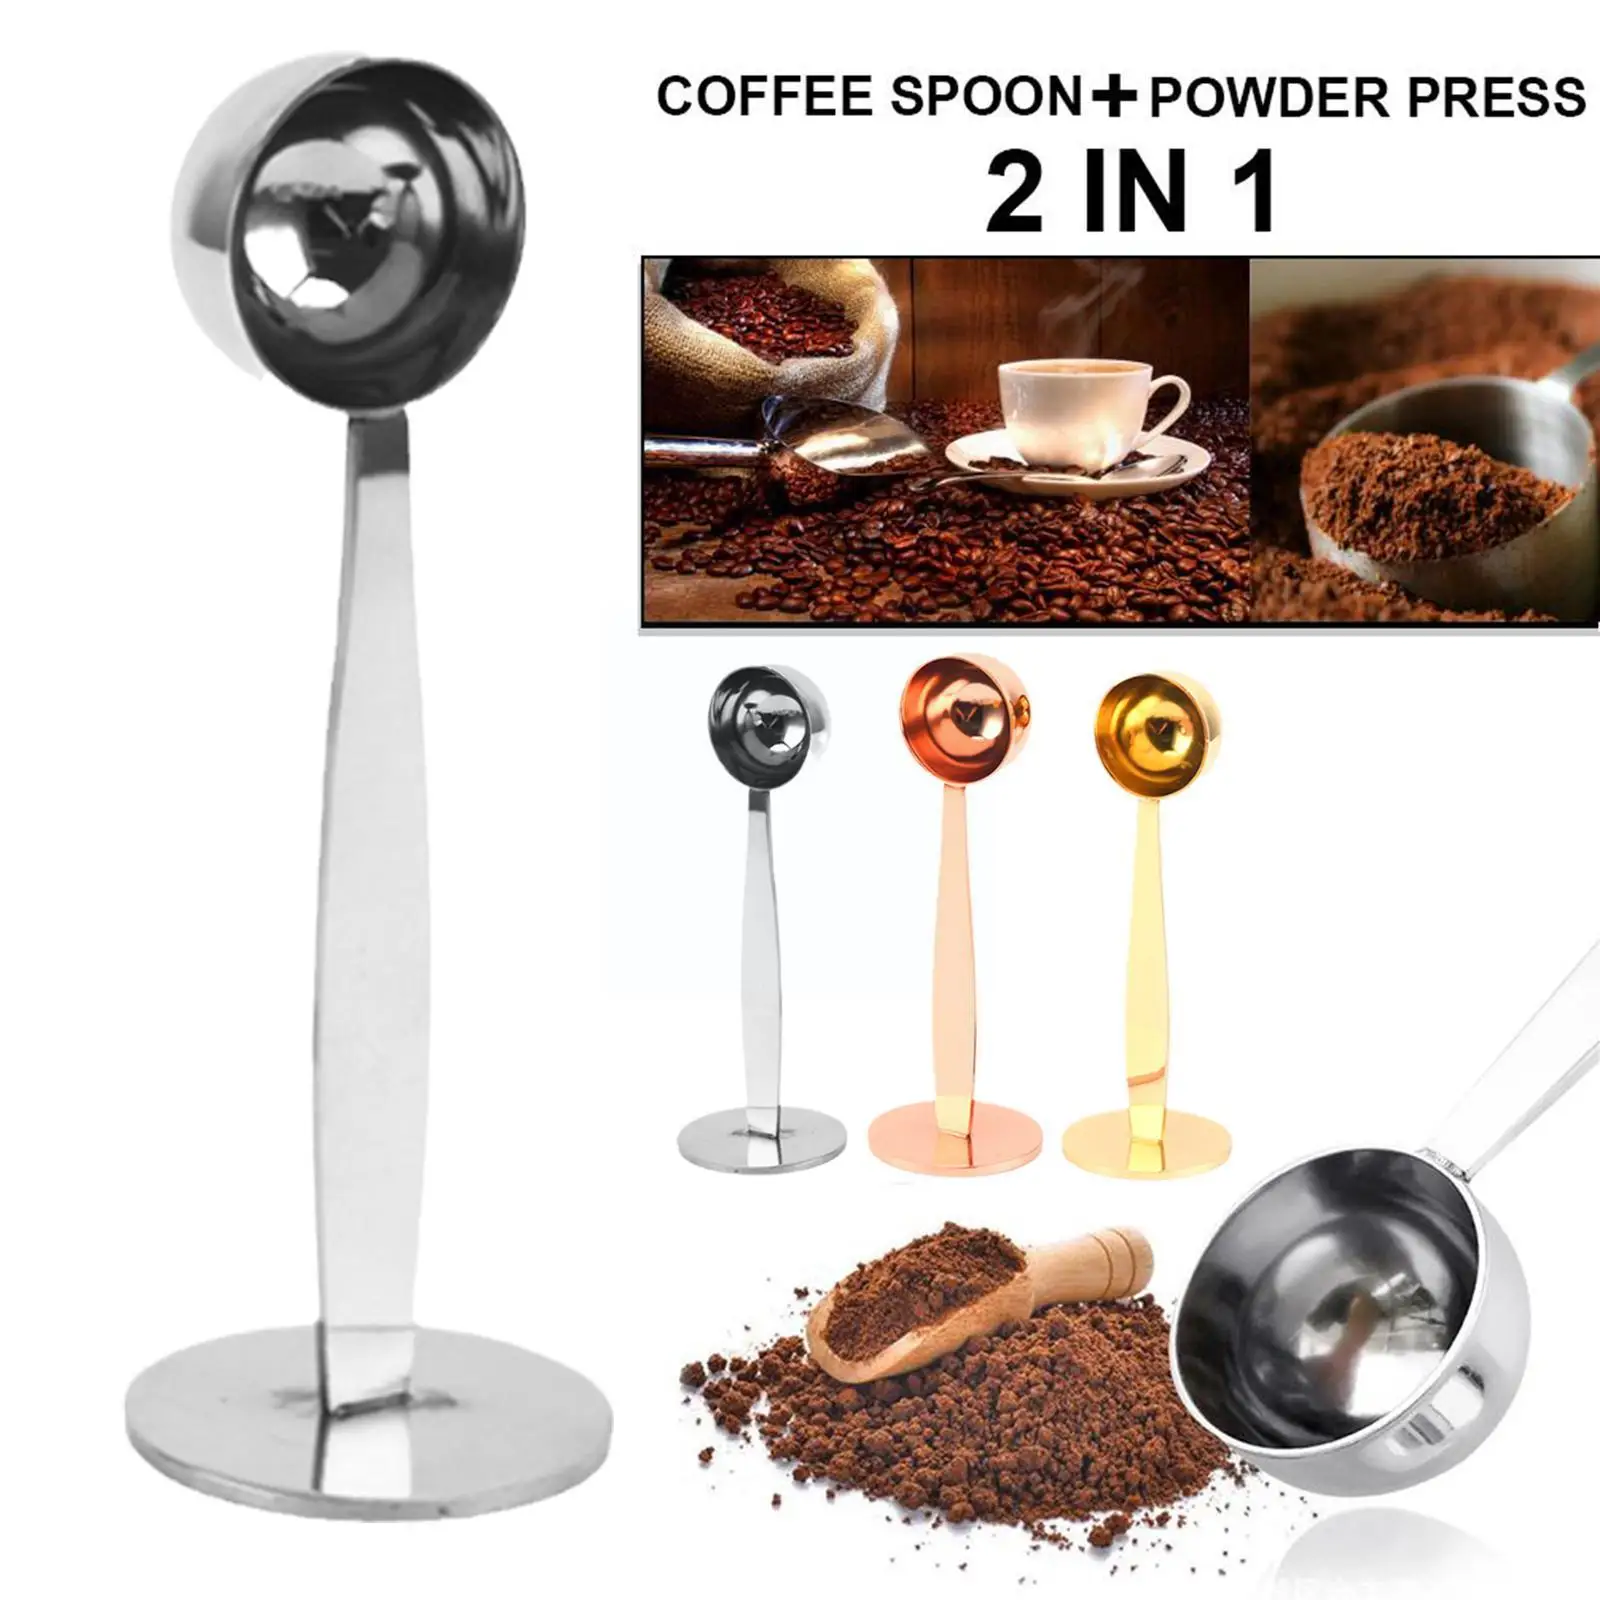 2 In 1 Coffee Spoon Standard Measuring Spoon Dual-use Coffee Tools Kitchen Scoop Press Accessories Machine Powder Bean Scoo A5A8